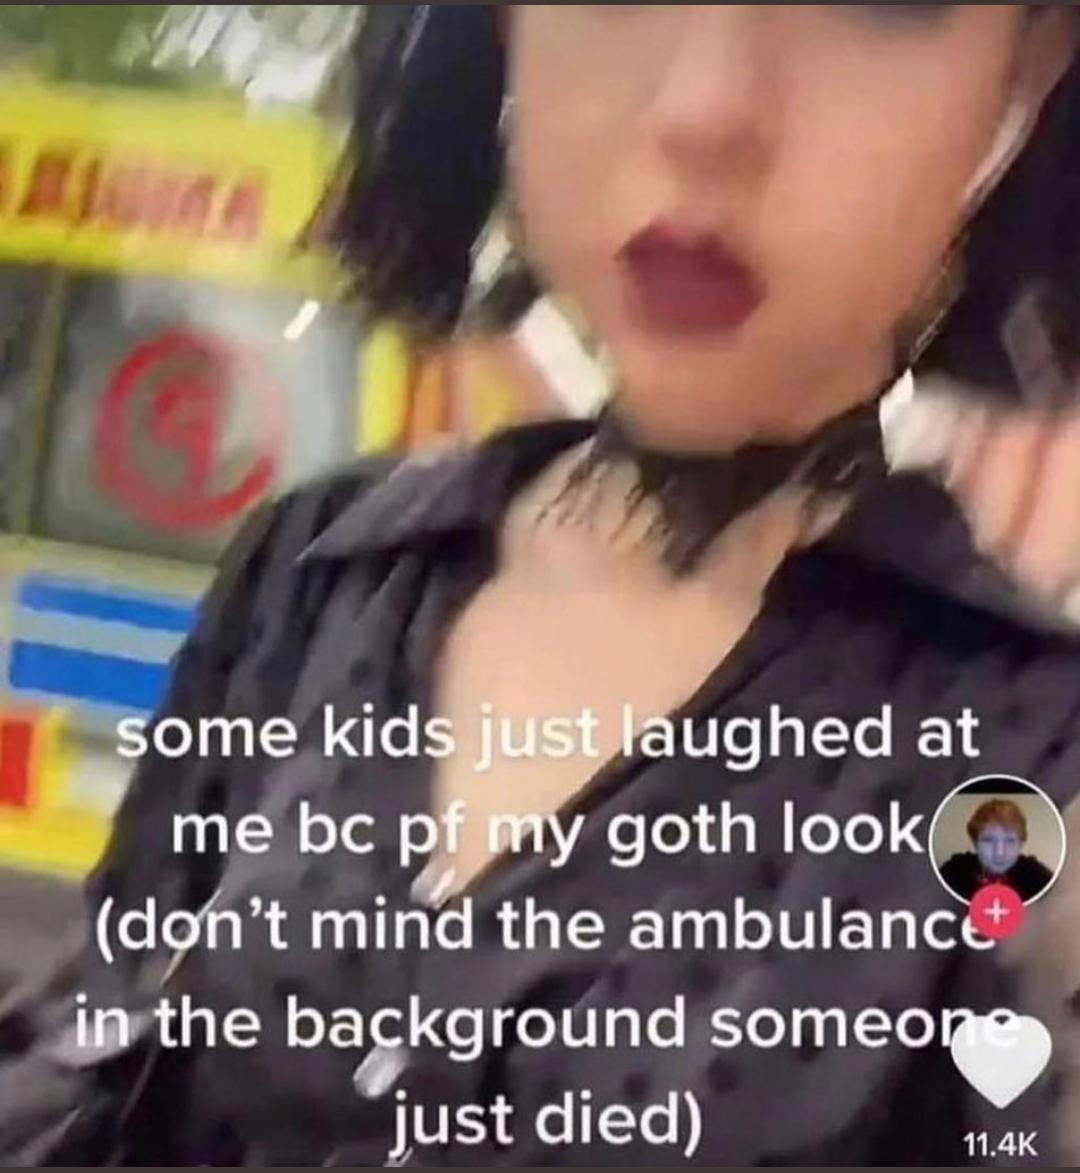 cringe pics - some kids just laughed at me because - some kids just laughed at me bc pf my goth look don't mind the ambulance in the background someone just died